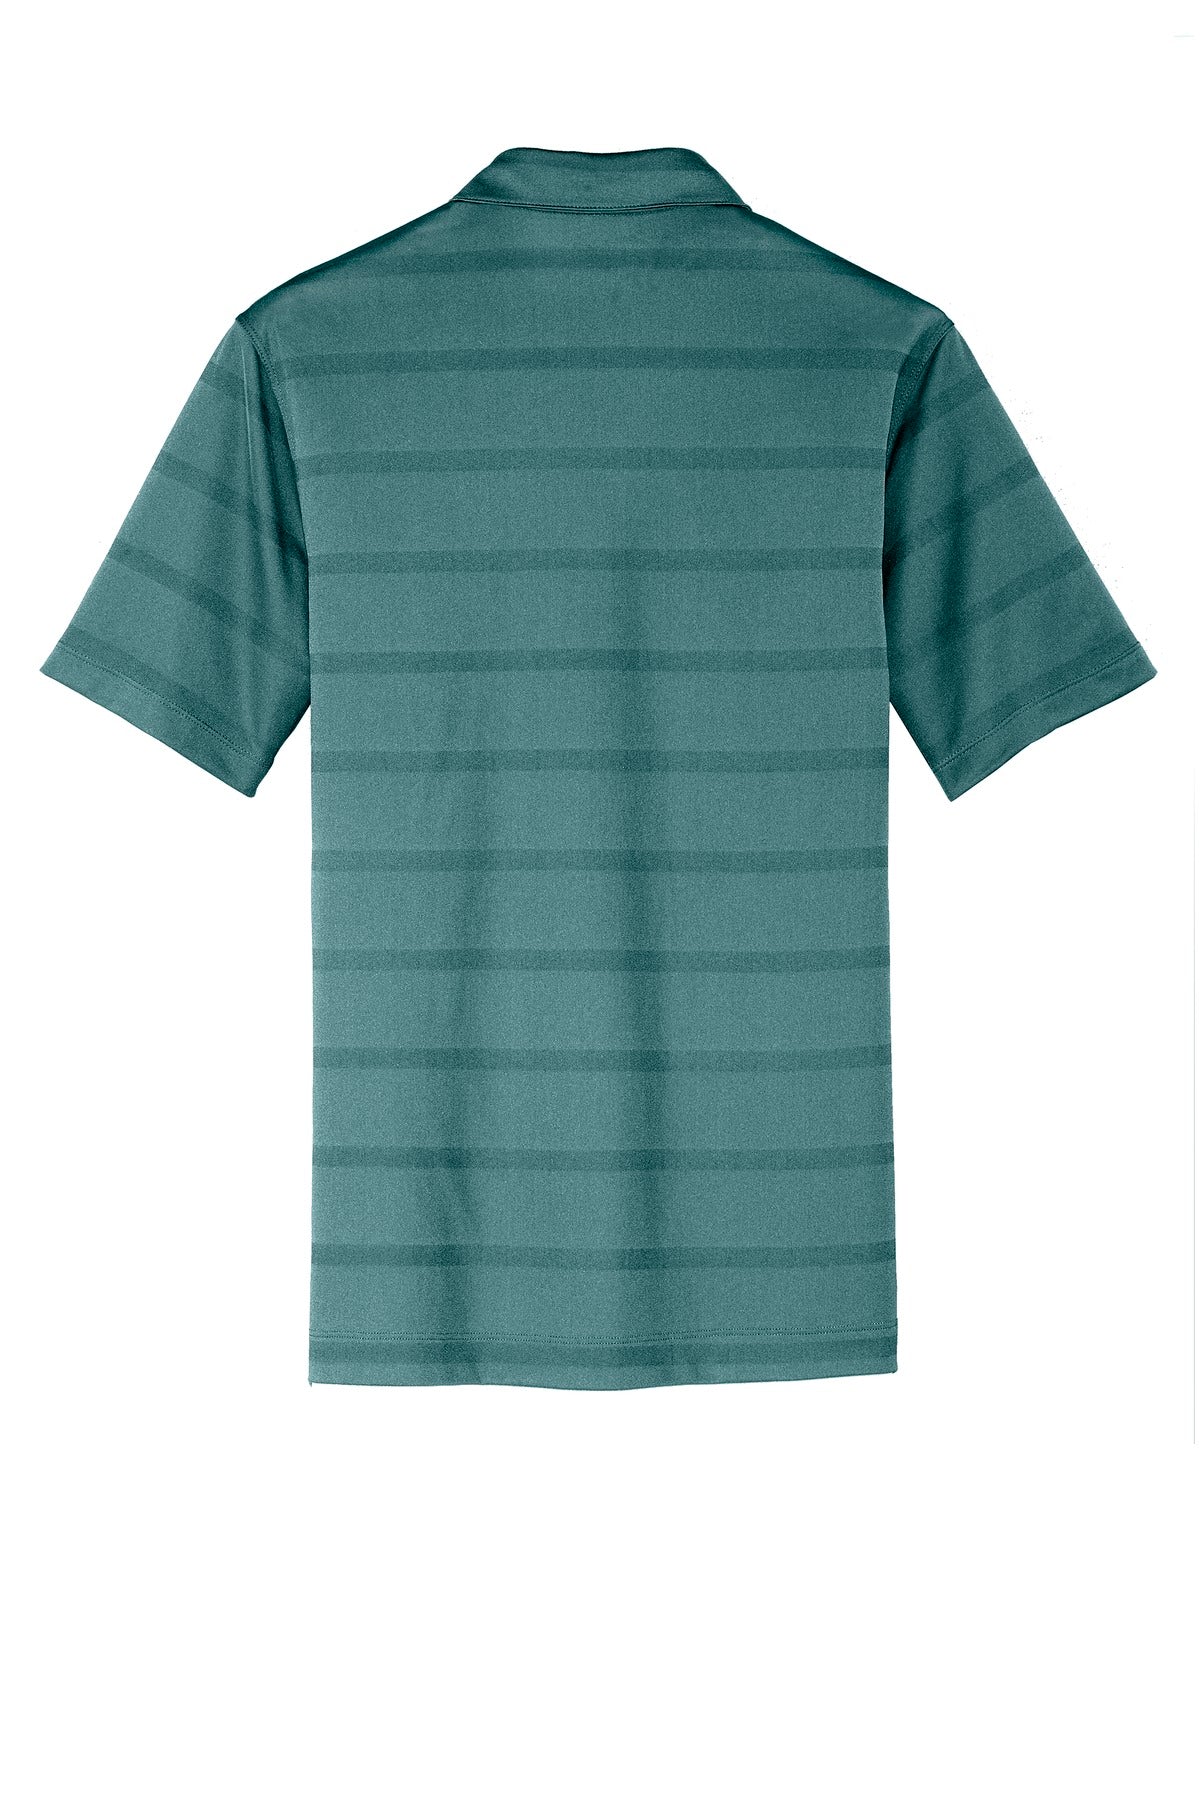 Sport Teal/ Anthracite